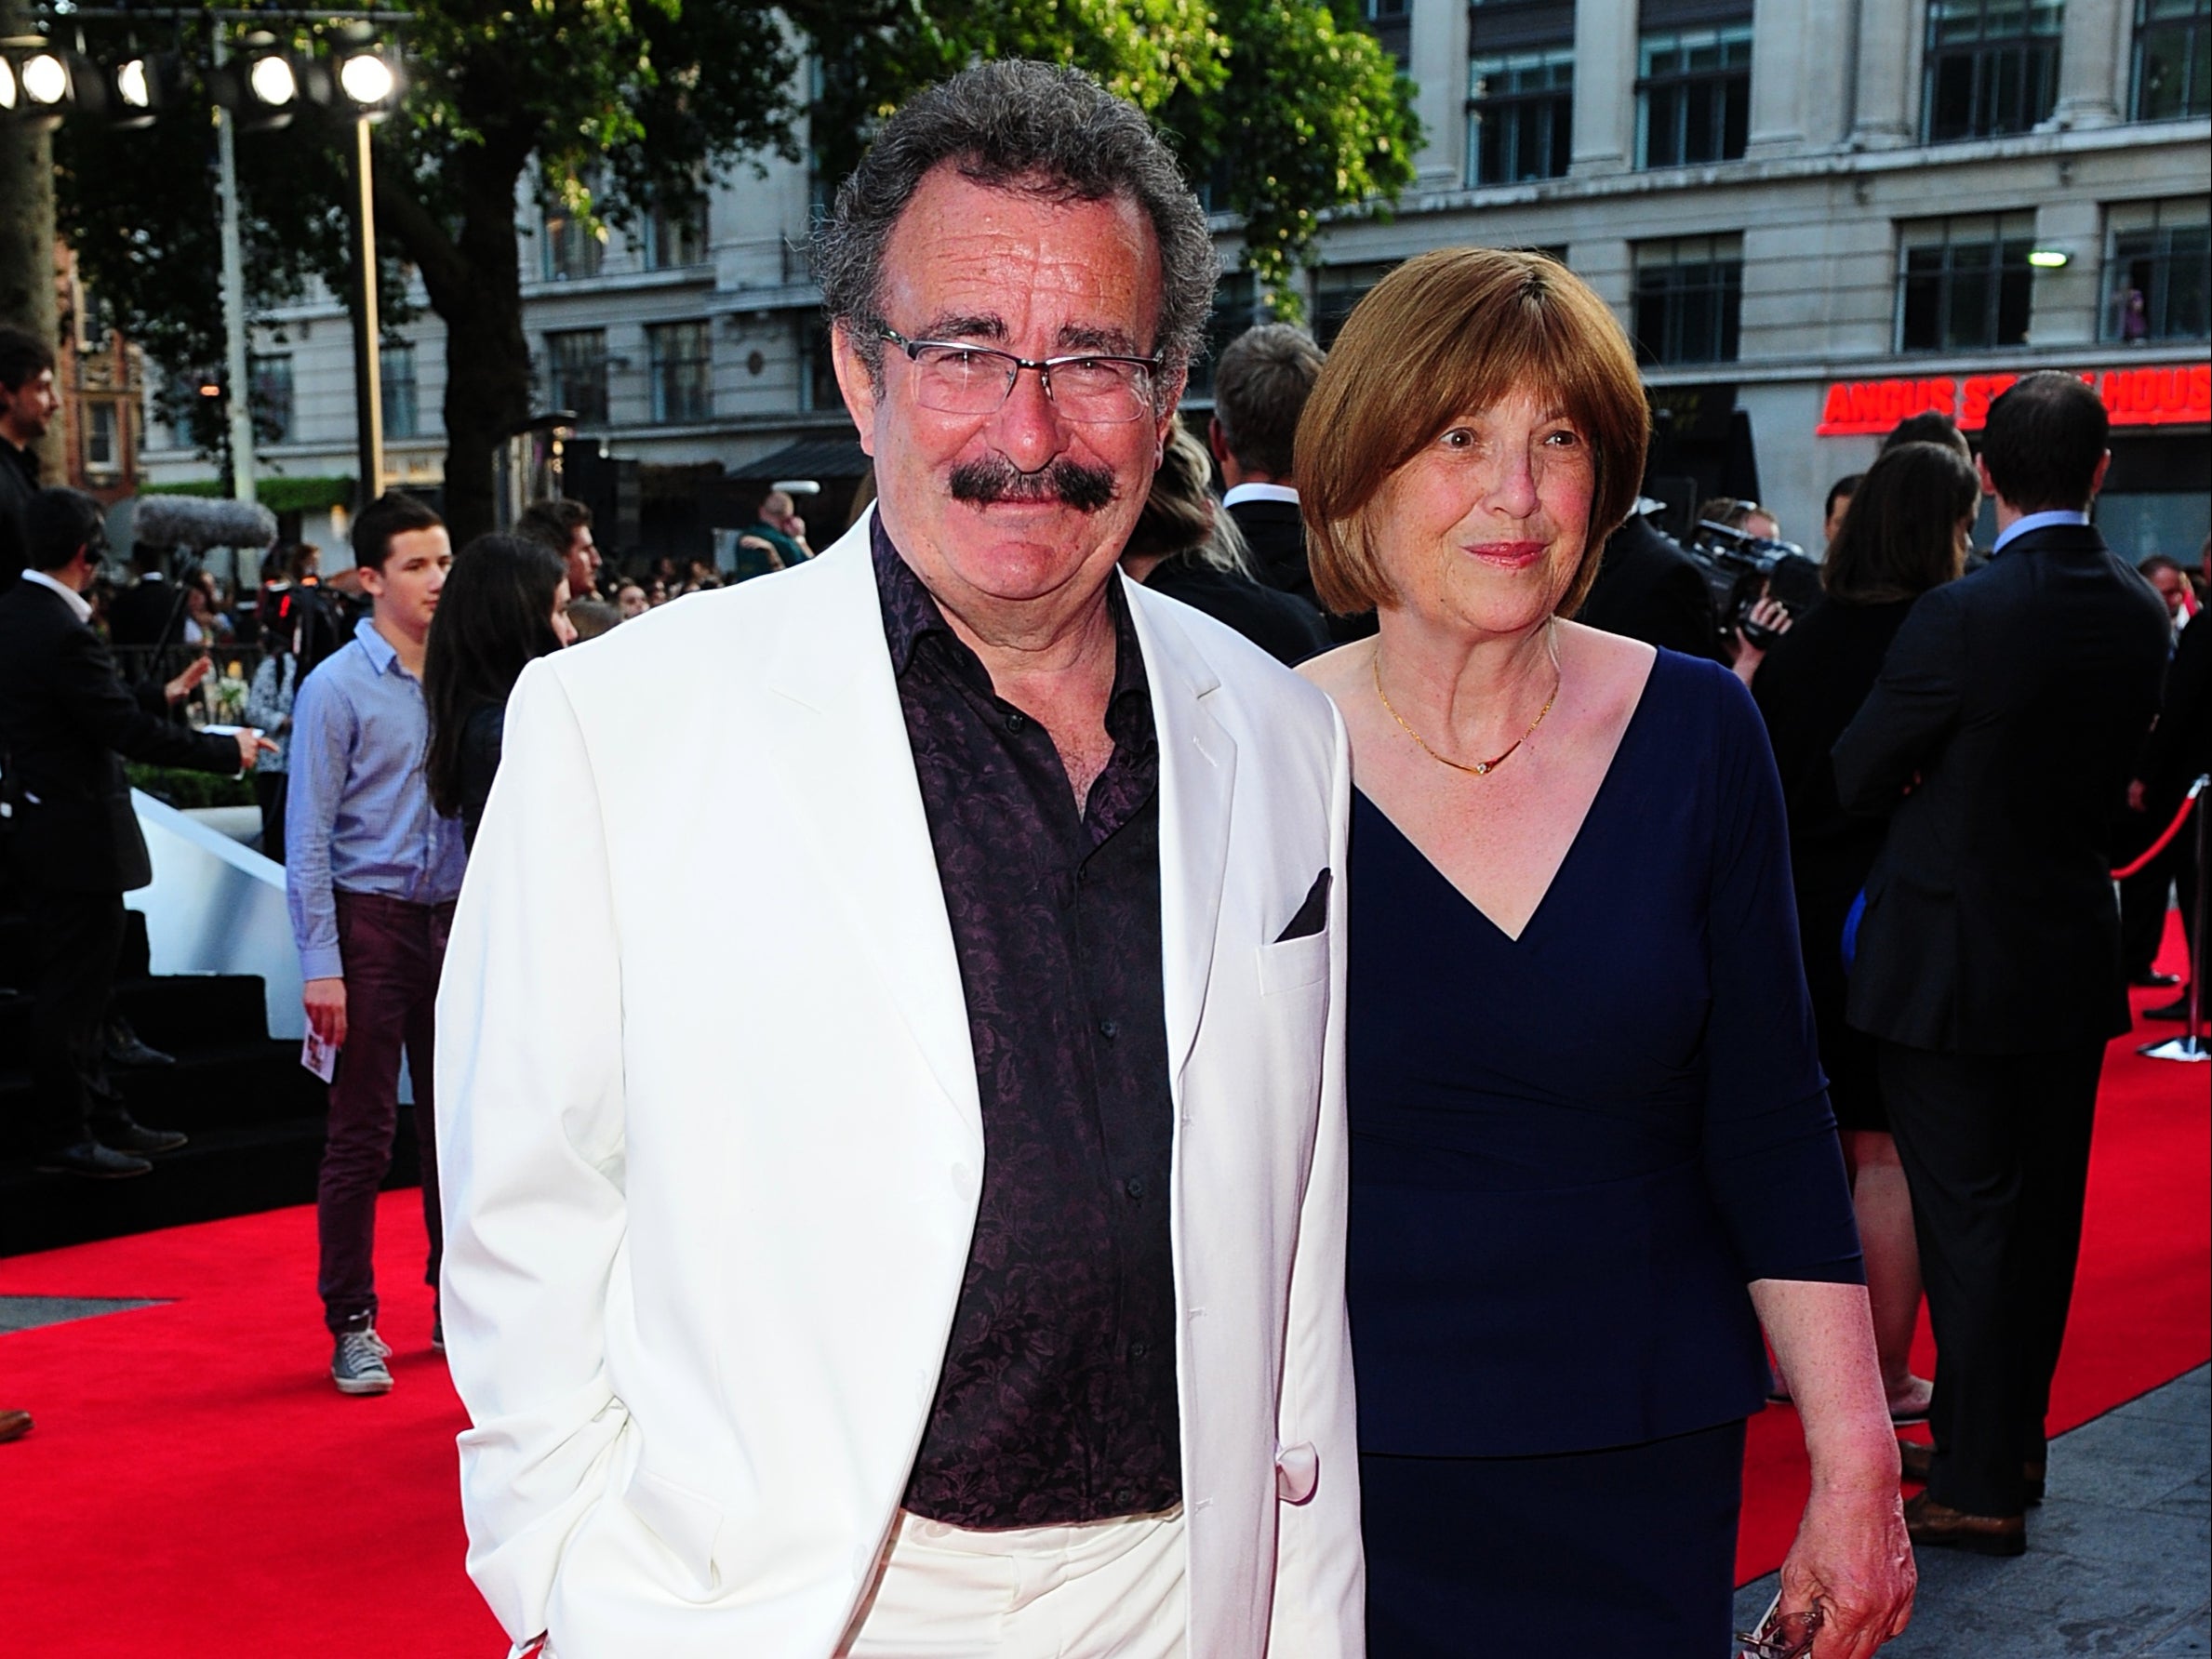 Lord Winston has accused the emergency services of wasting time as Lady Winston lay dying in his arms